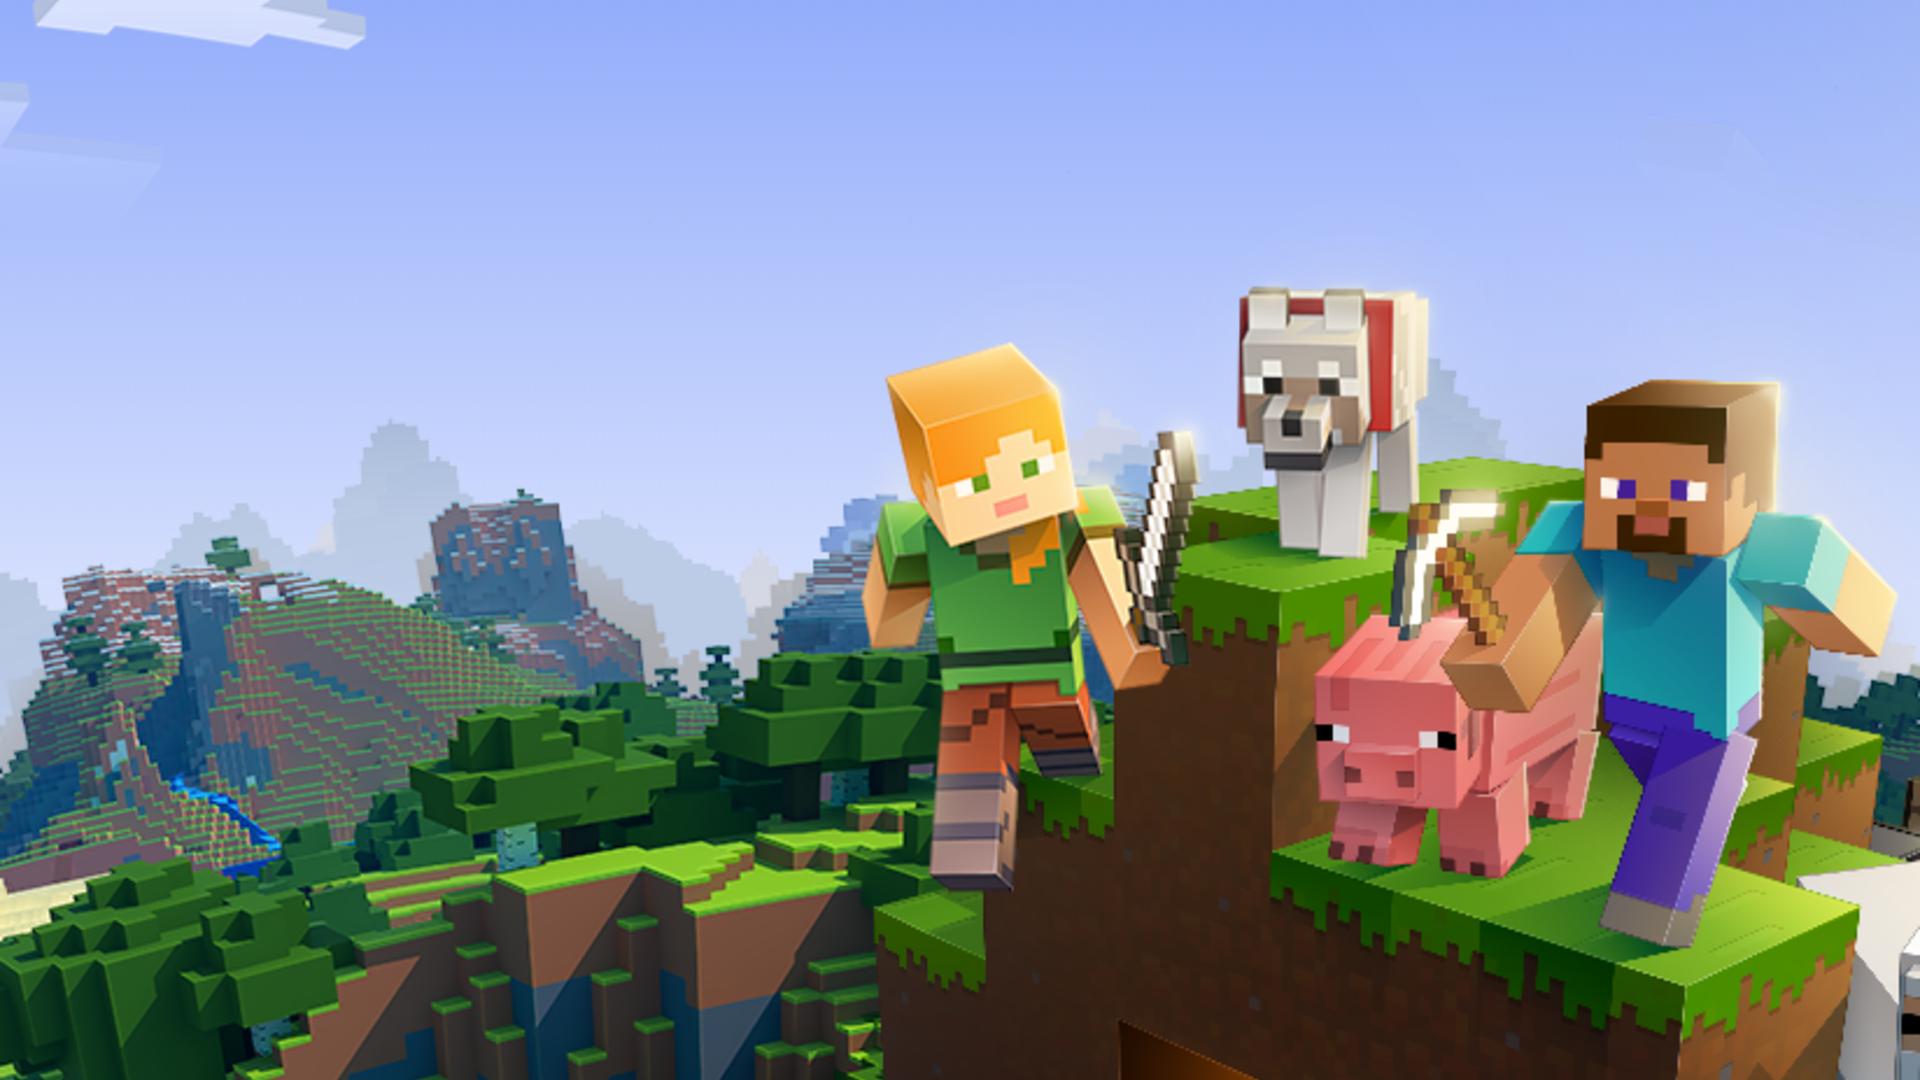 Cute Minecraft Animal Wallpapers Wallpapers